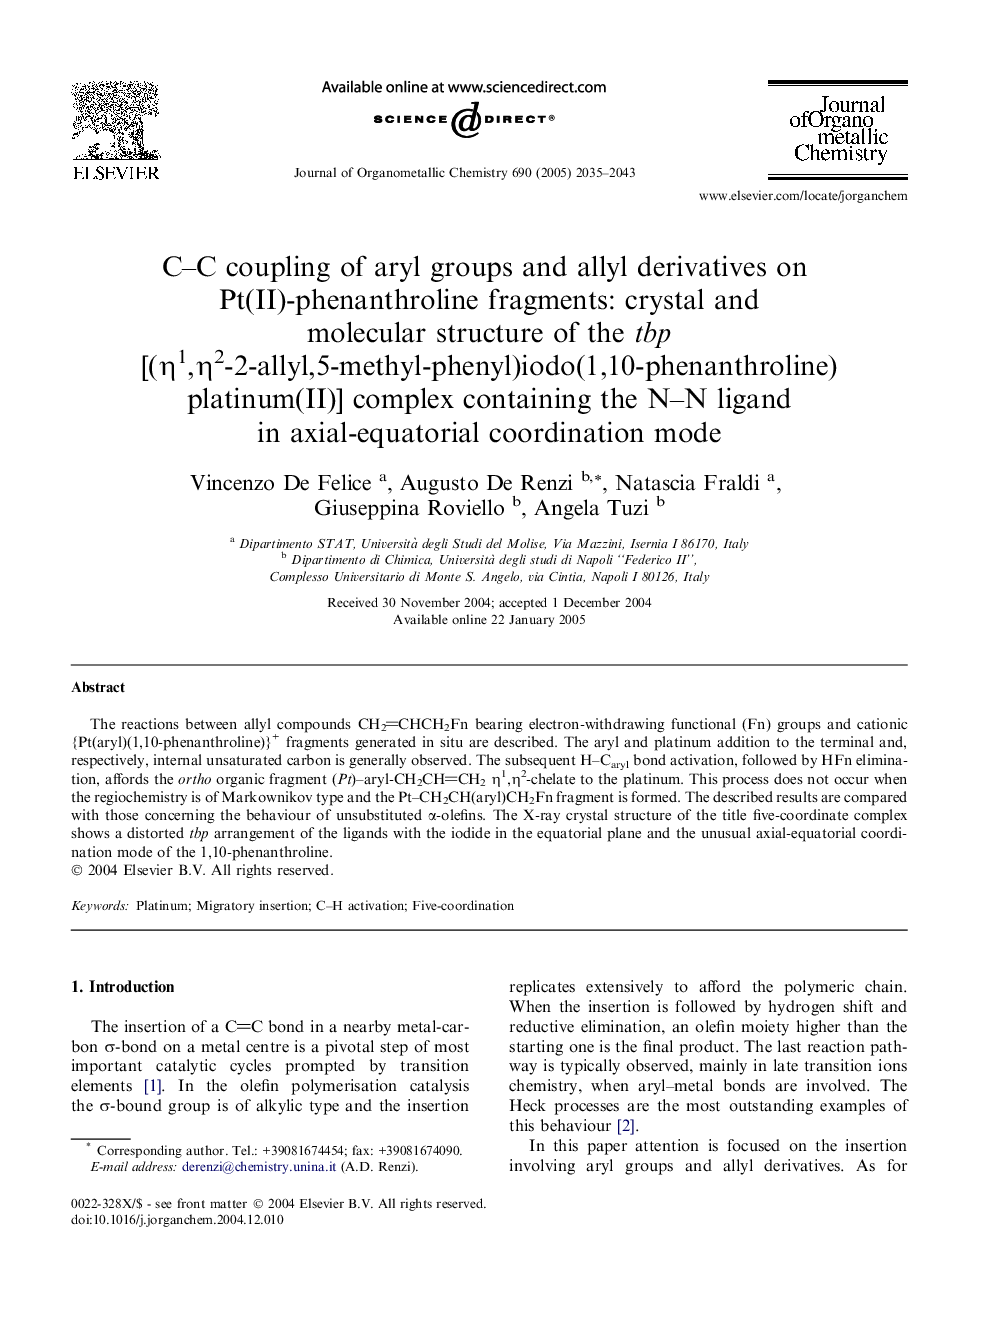 C–C coupling of aryl groups and allyl derivatives on Pt(II)-phenanthroline fragments: crystal and molecular structure of the tbp [(η1,η2-2-allyl,5-methyl-phenyl)iodo(1,10-phenanthroline)platinum(II)] complex containing the N–N ligand in axial-equatorial c